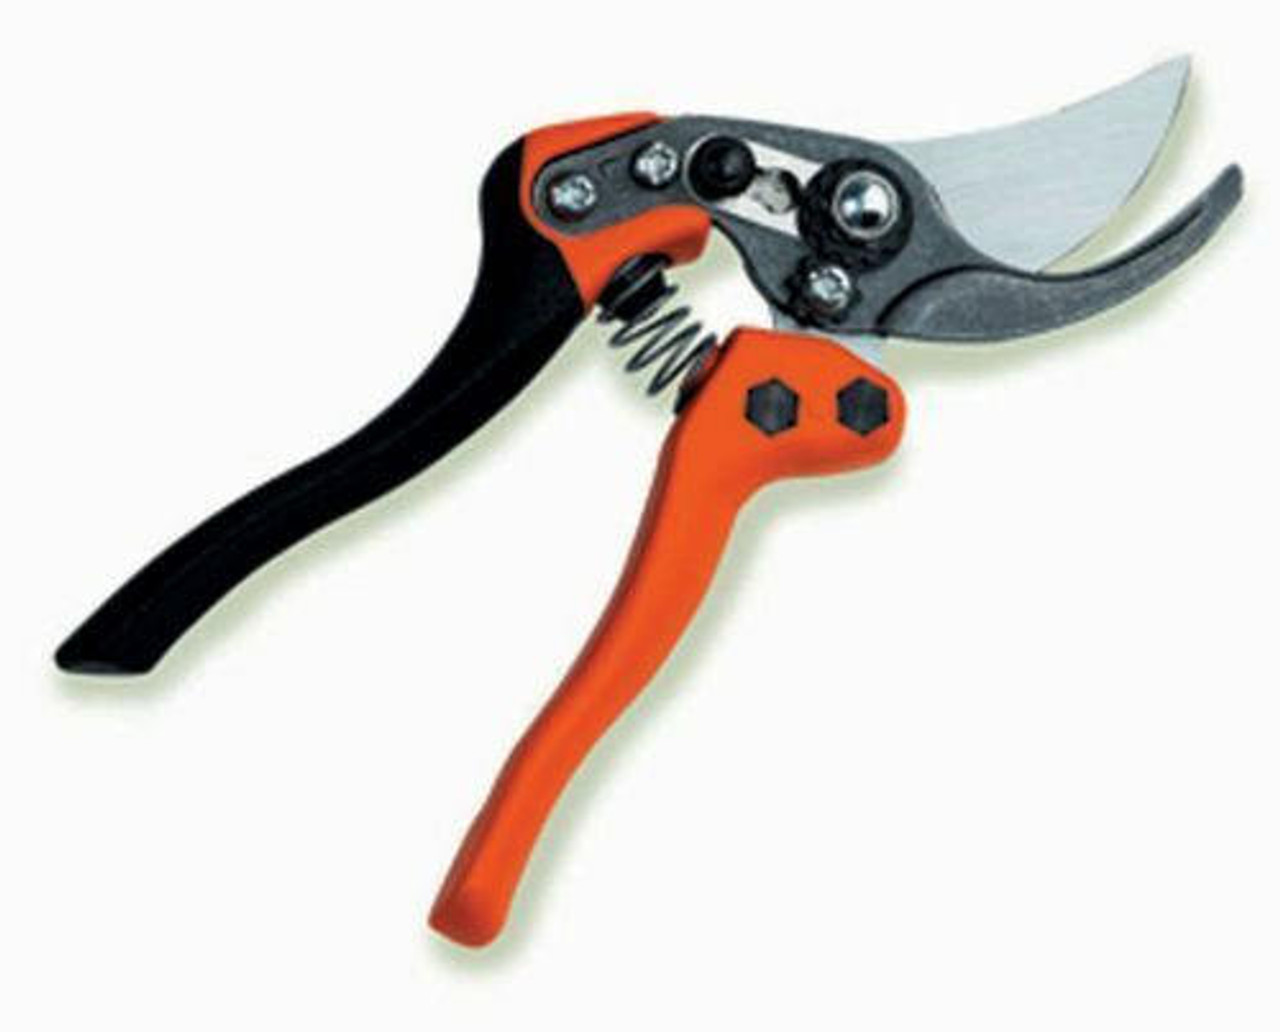 Bahco 1 1/4" Bahco large handle cutting head Pruner - PX-L3 